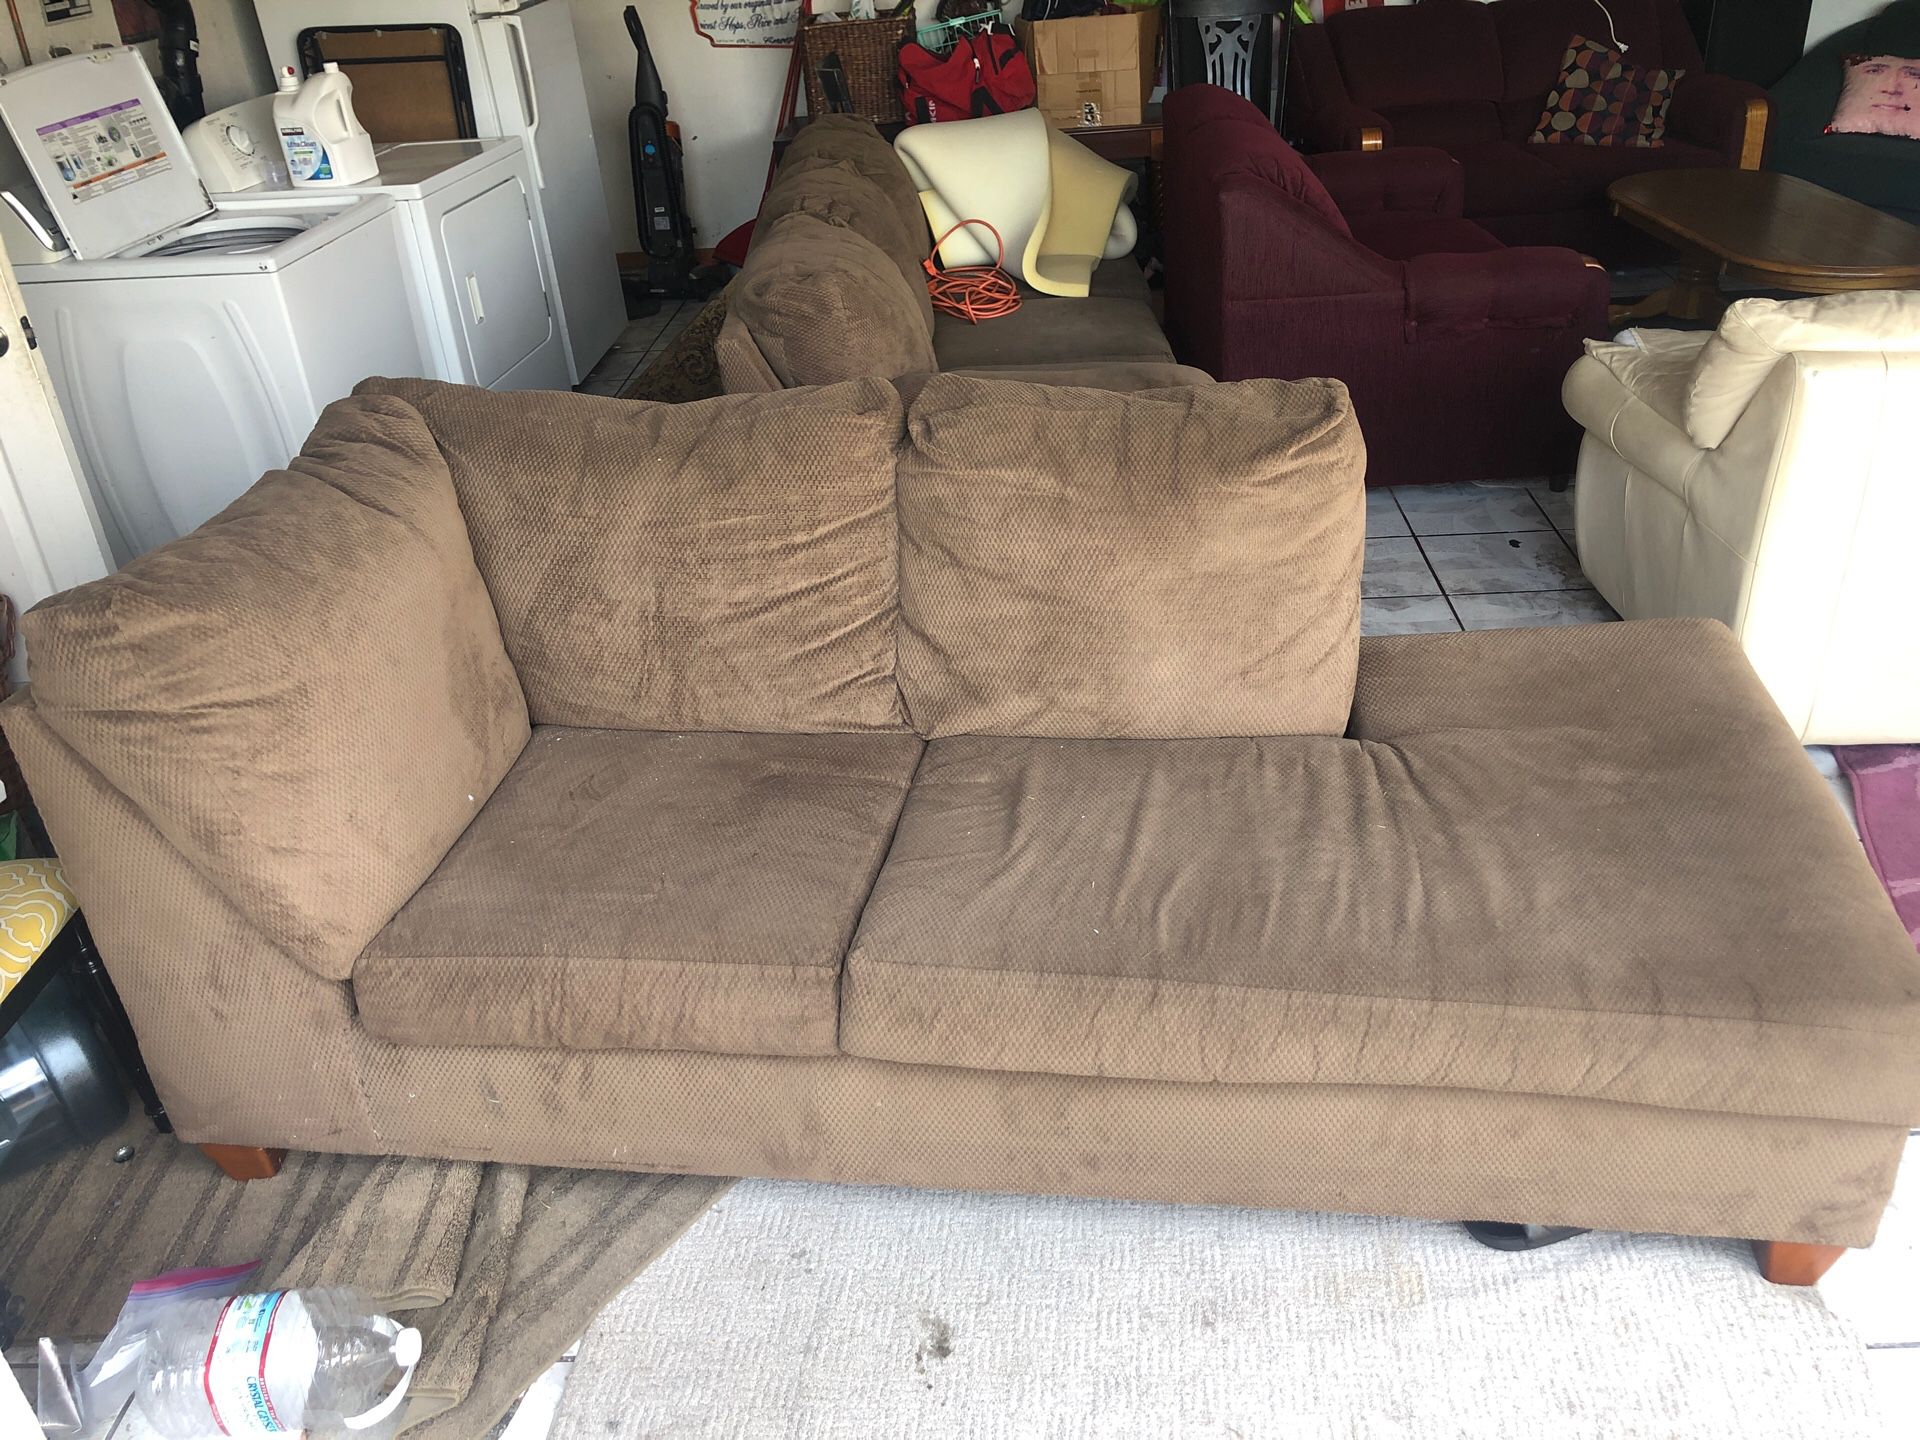 FREE SECTIONAL. ON CURB. FIRST COME